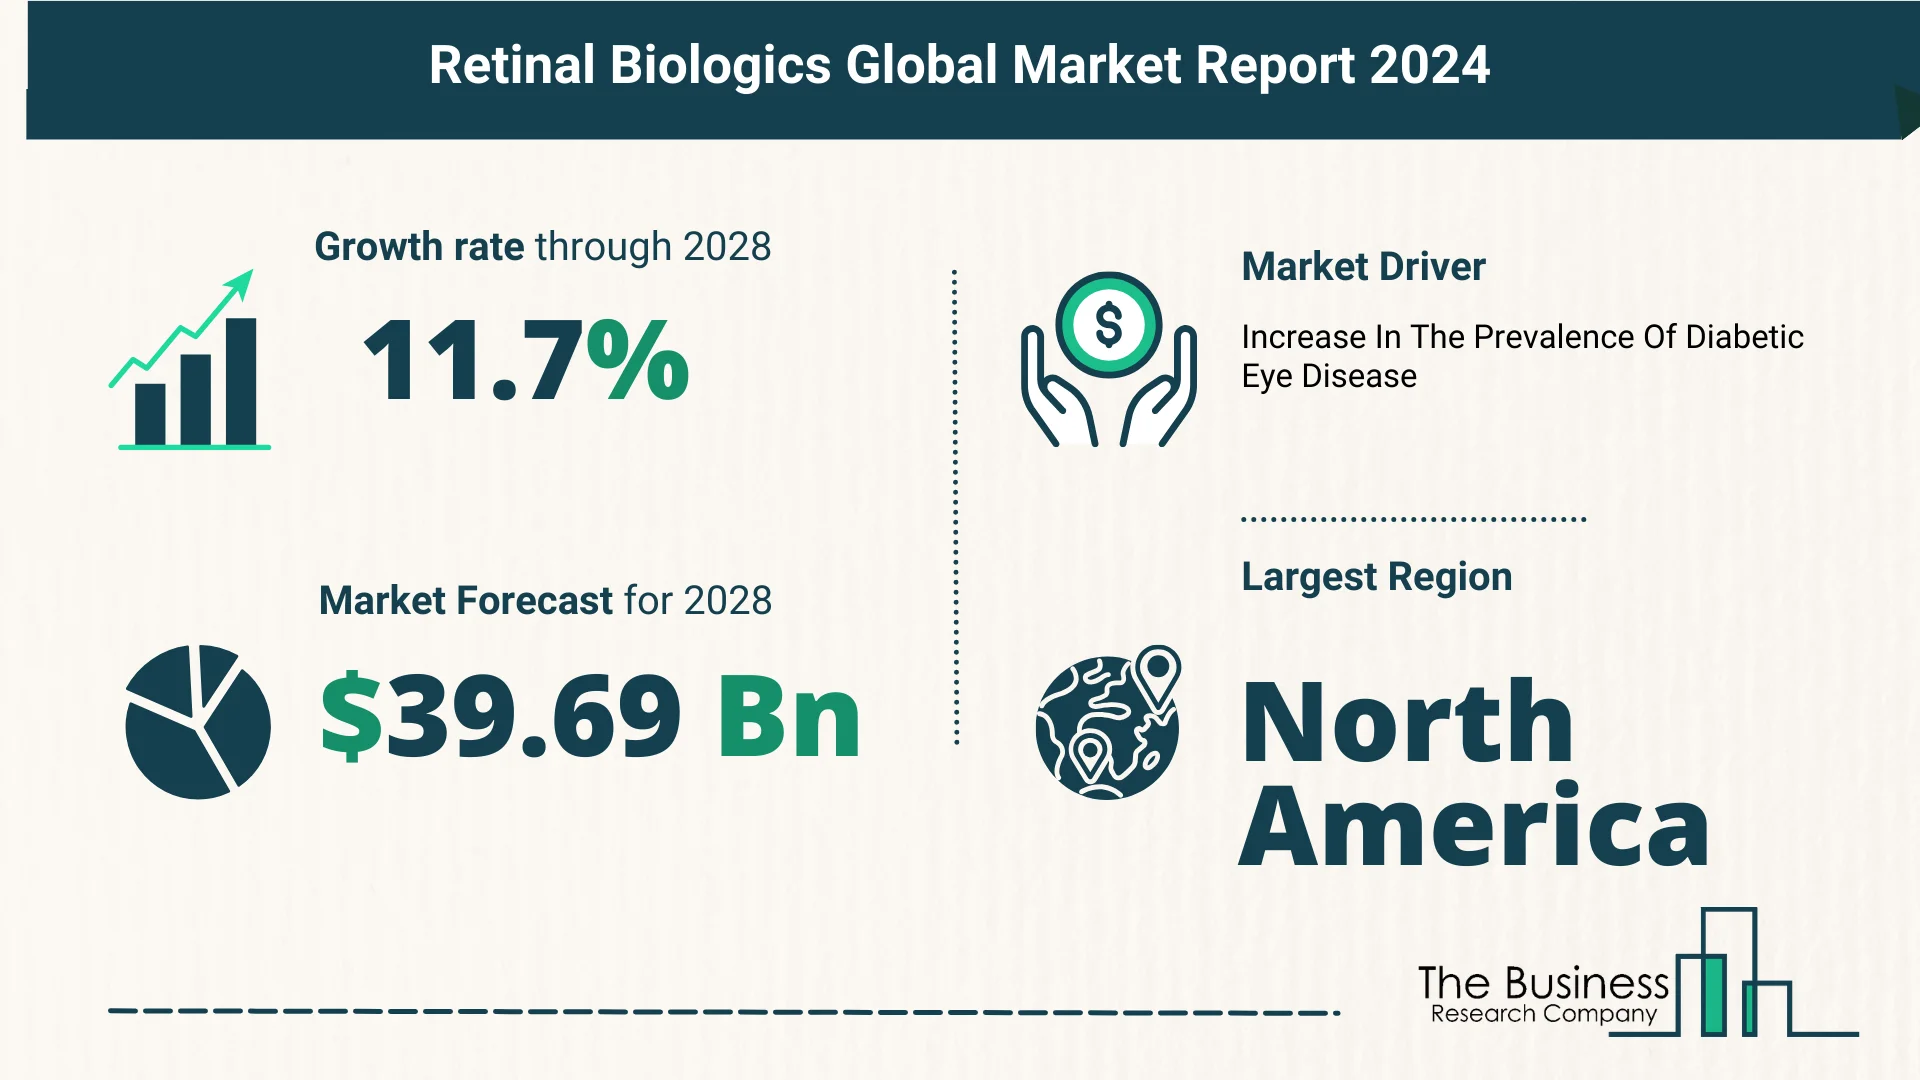 Key Insights On The Retinal Biologics Market 2024 – Size, Driver, And Major Players